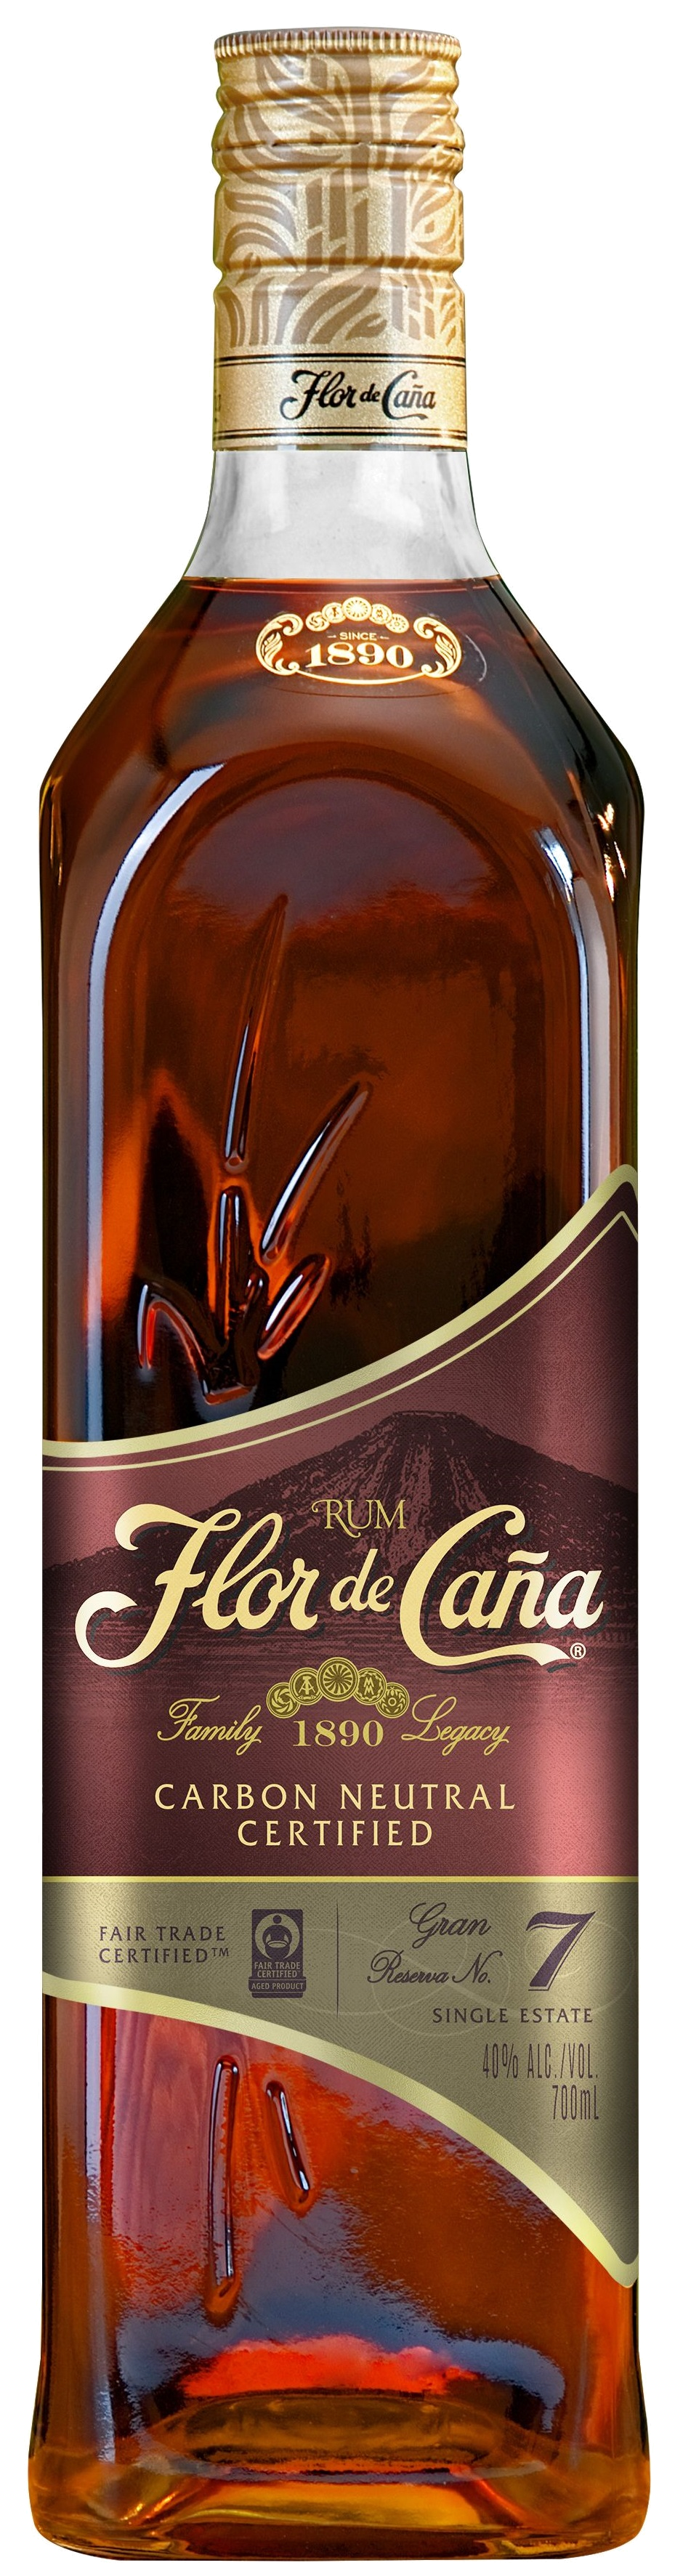 Flor de Cana Rum Grand Reserve 7 years old